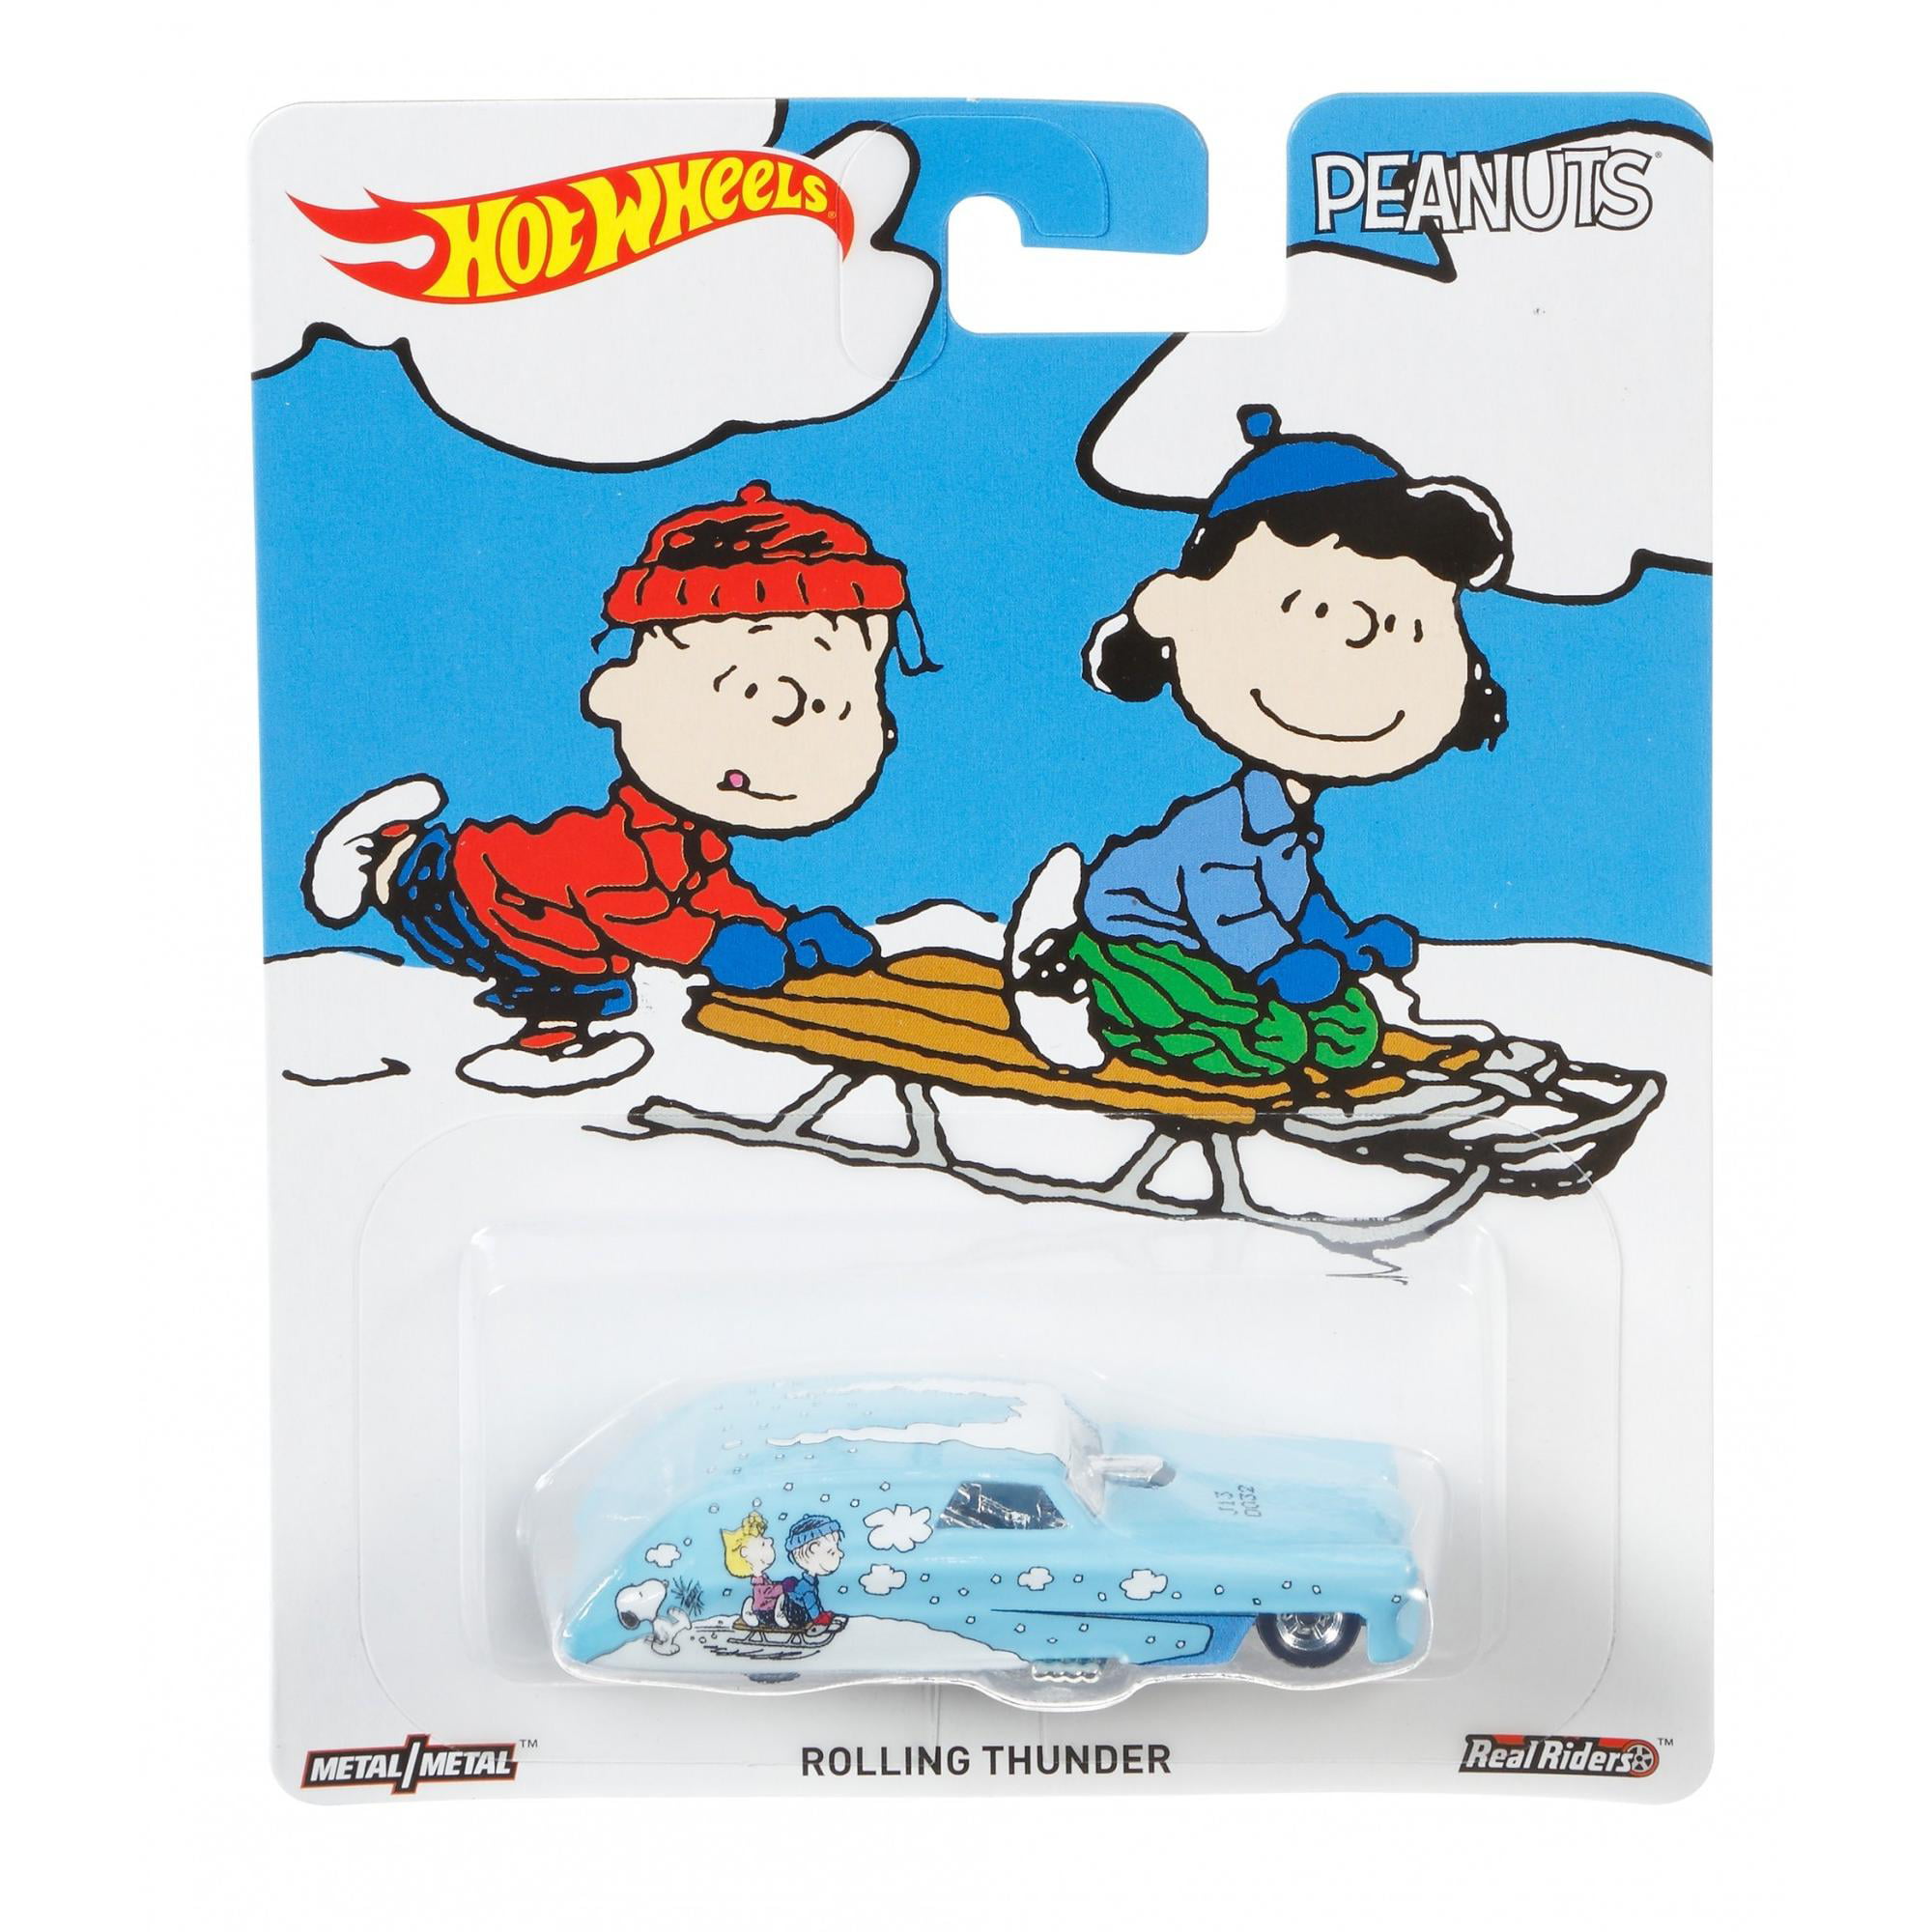 Hot Wheels Rolling Thunder Funny Car Sedan Delivery Snoopy Peanuts Pop Culture 